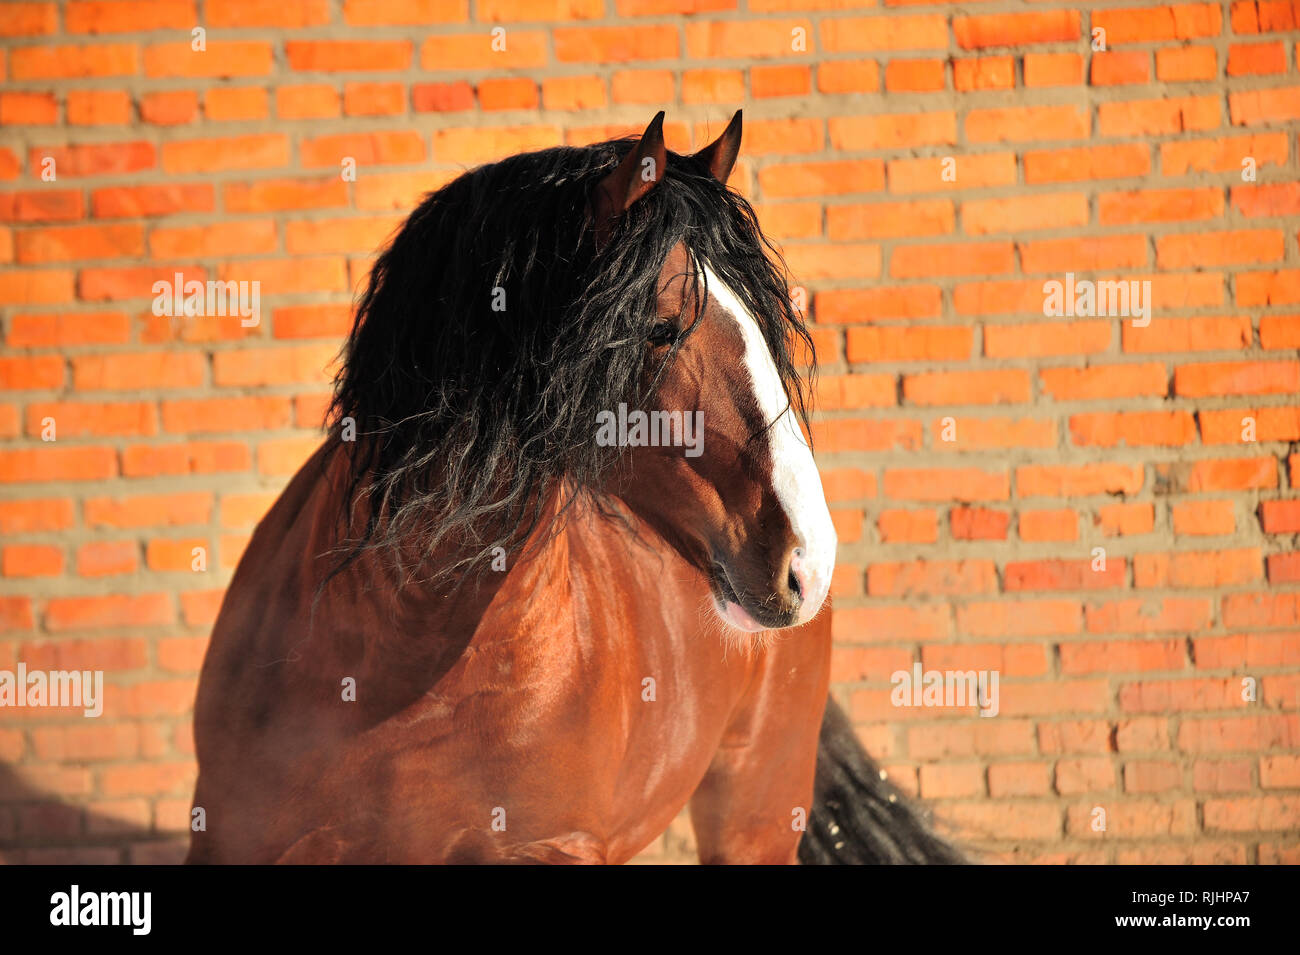 Bay draft horse with black mane and white nose stands beside red brick wall. Horizontal, sideways, portrait. Stock Photo